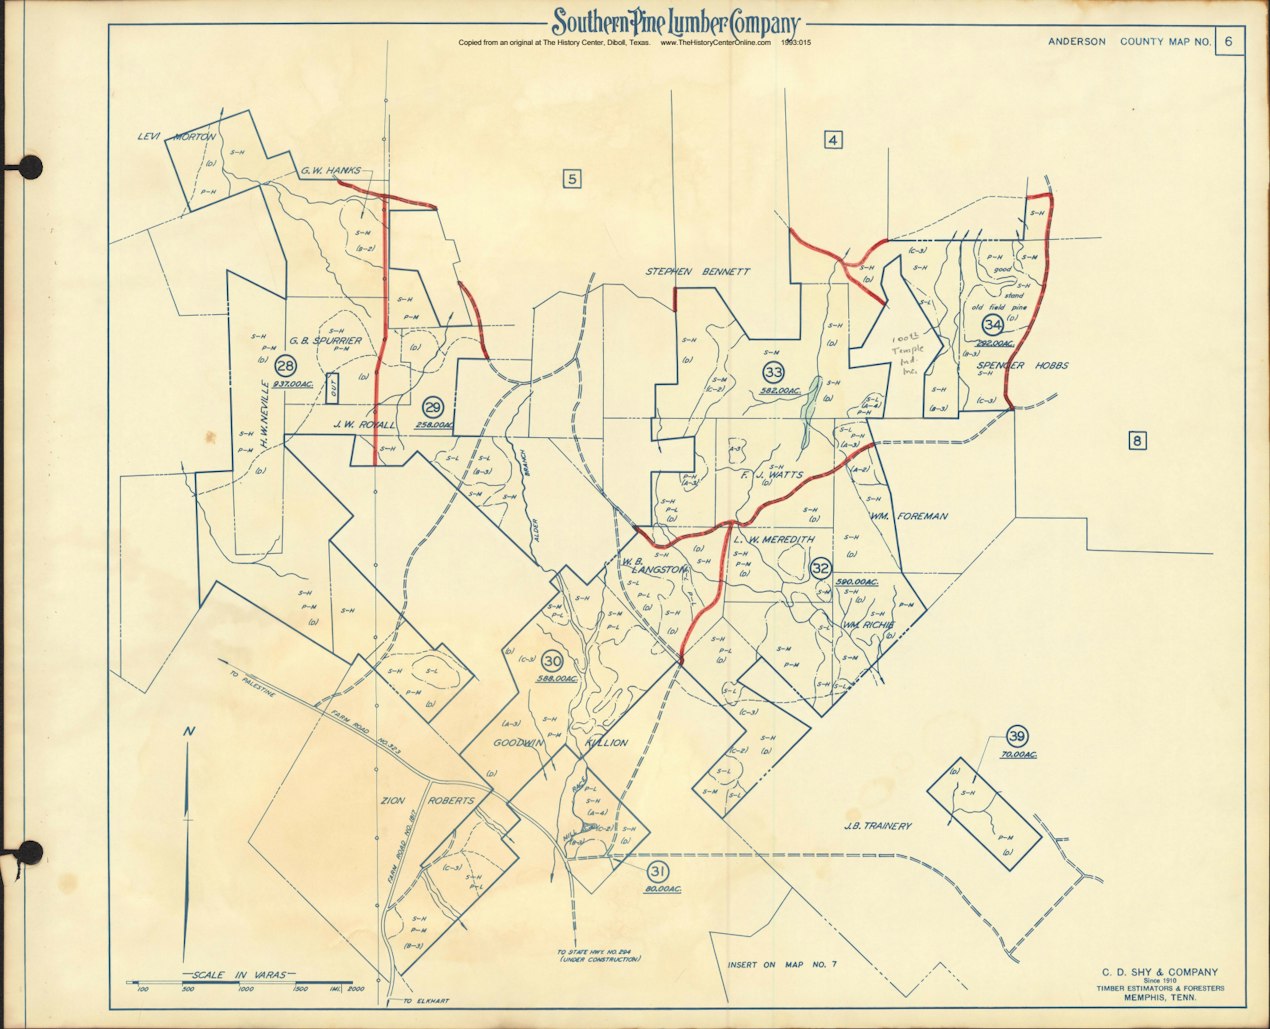 008 1955 Anderson County Timberlands Map 06